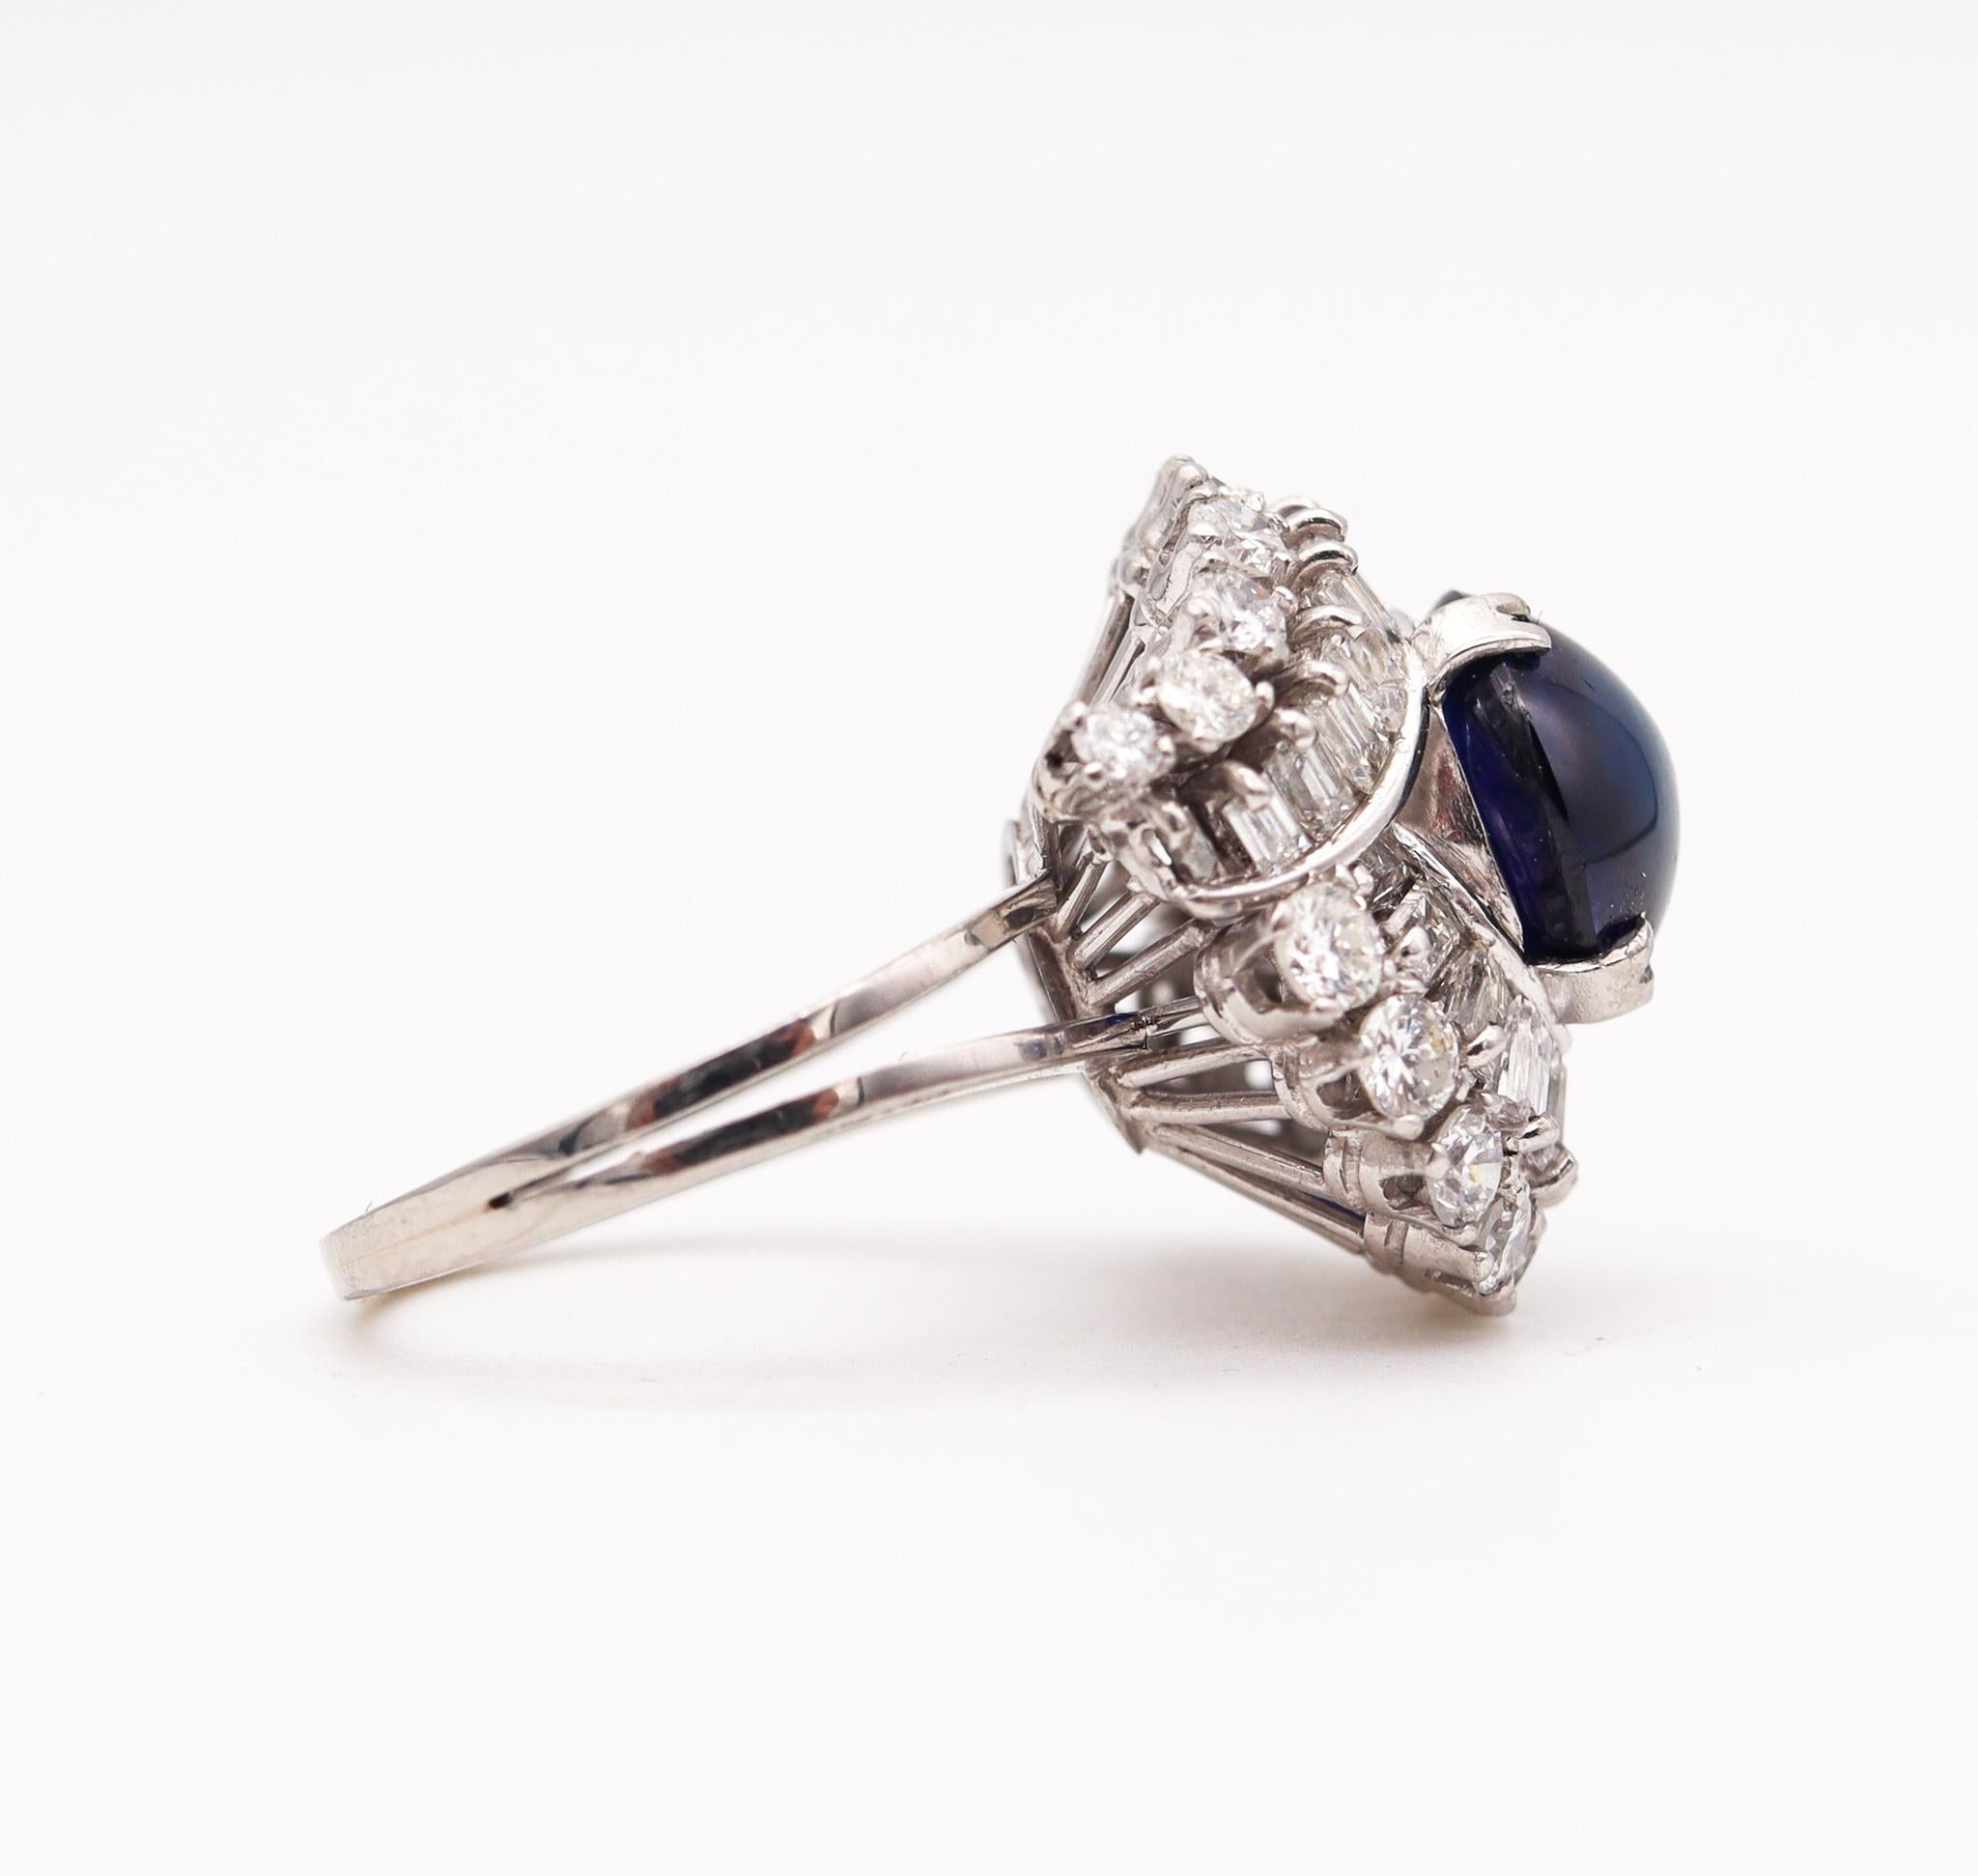 Cabochon Art Deco 1930 Gia Certified Platinum Cocktail Ring With 8.07 Ctw Pailin Sapphire